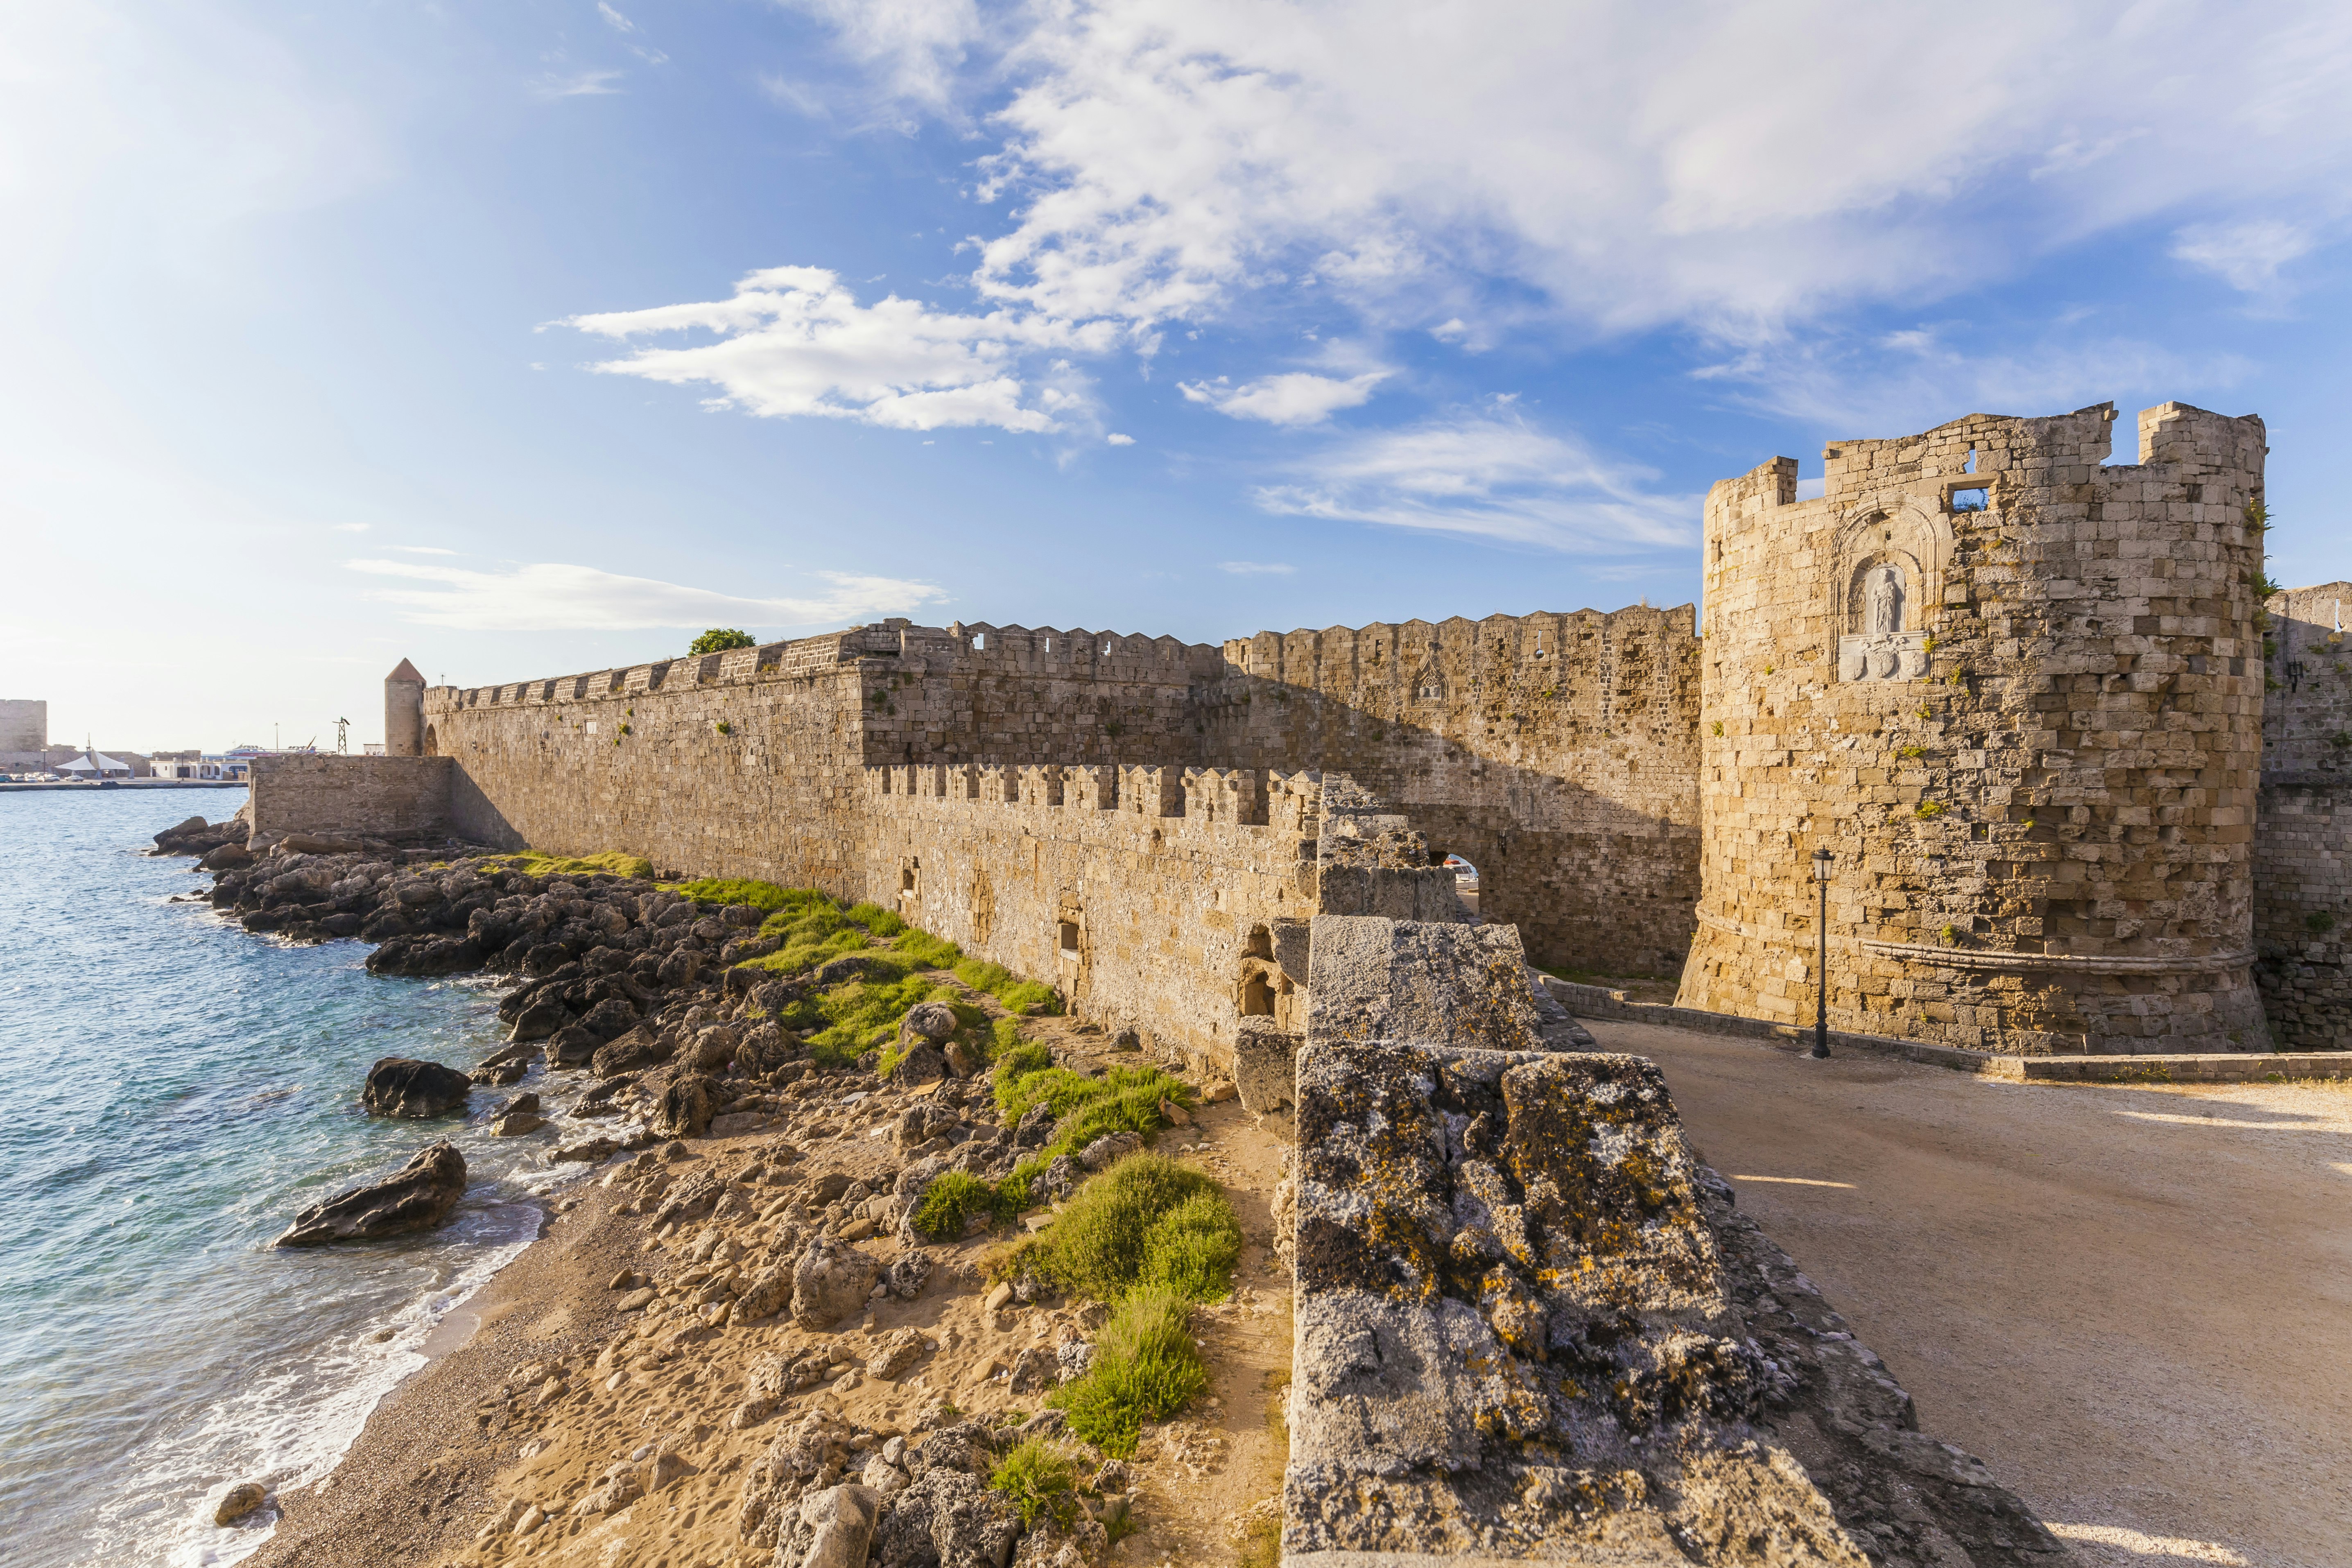 The ancient city walls in Rhodes' Old Town